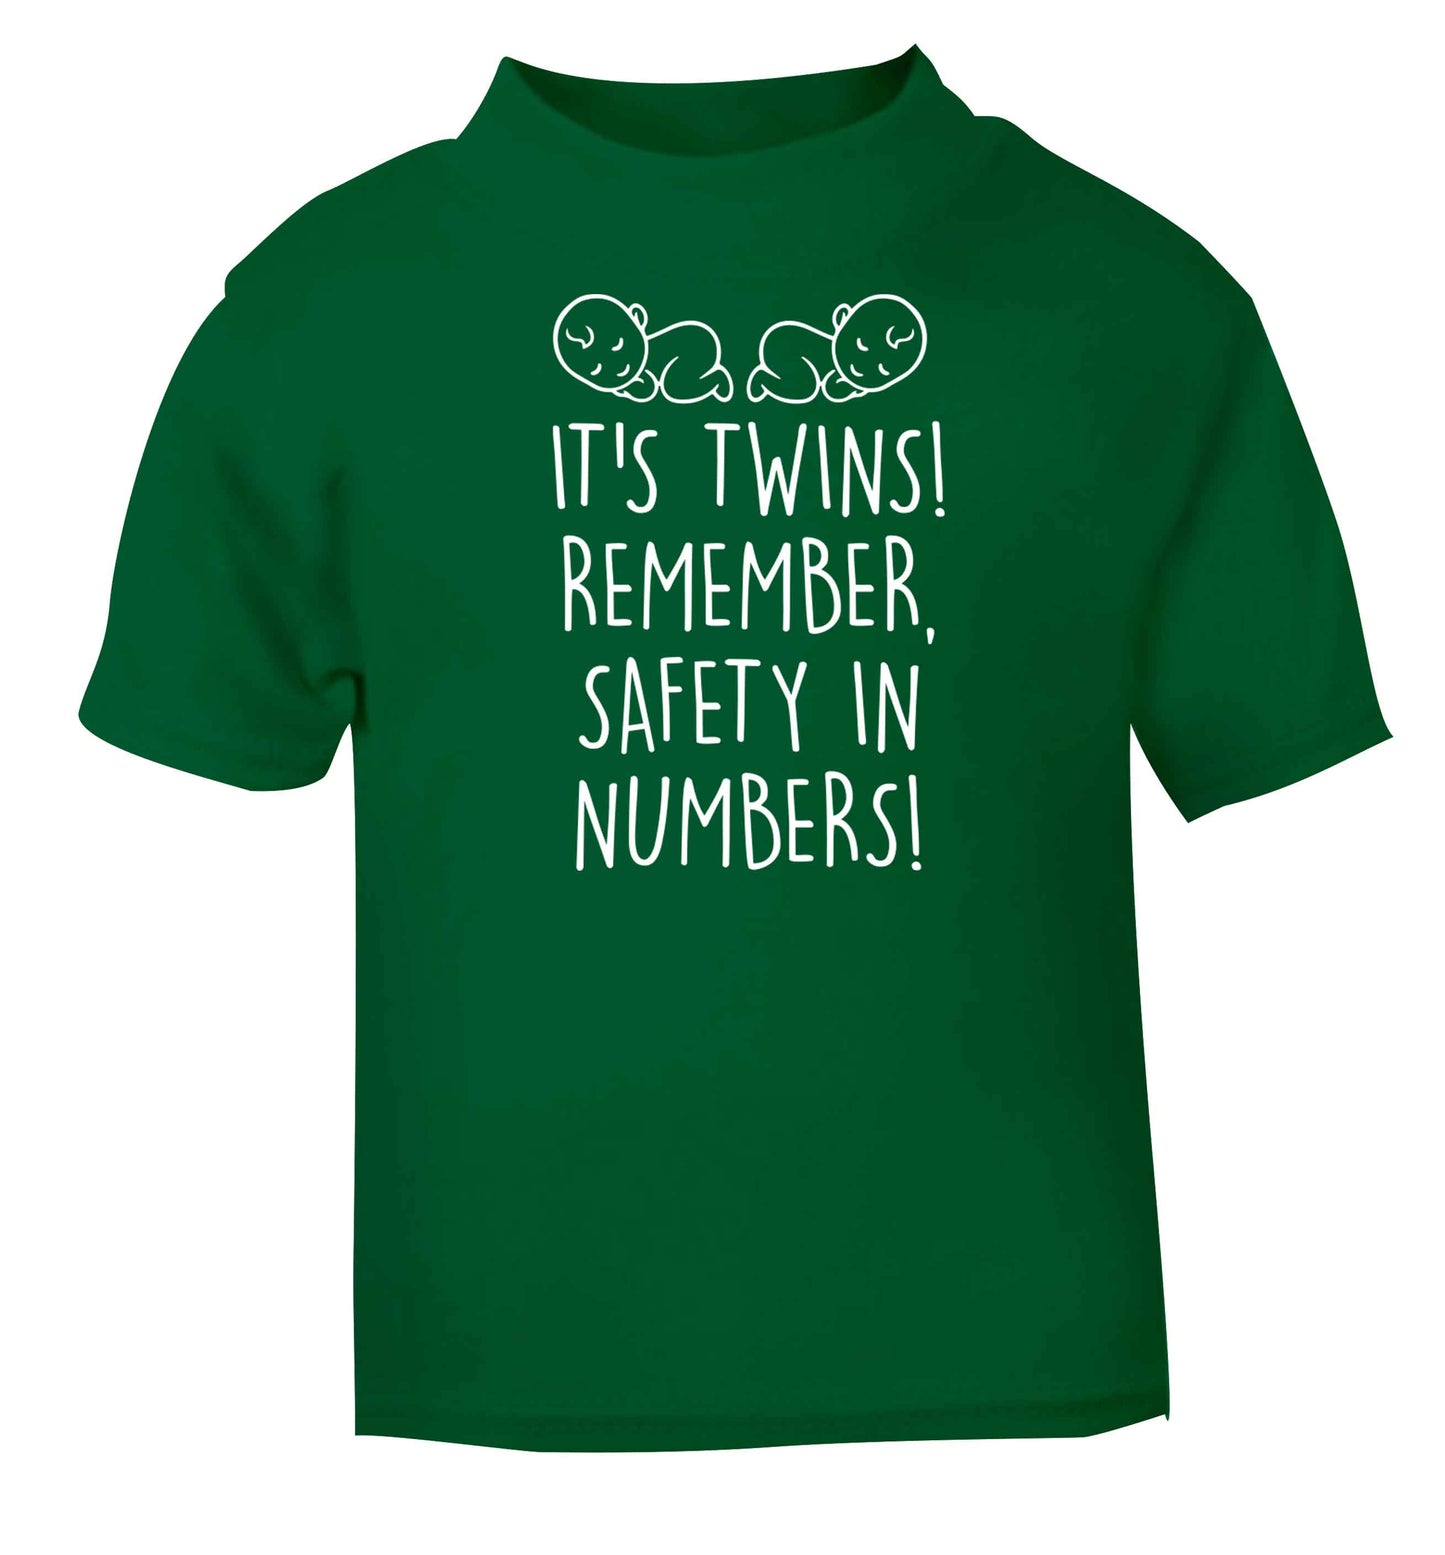 It's twins! Remember safety in numbers! green baby toddler Tshirt 2 Years